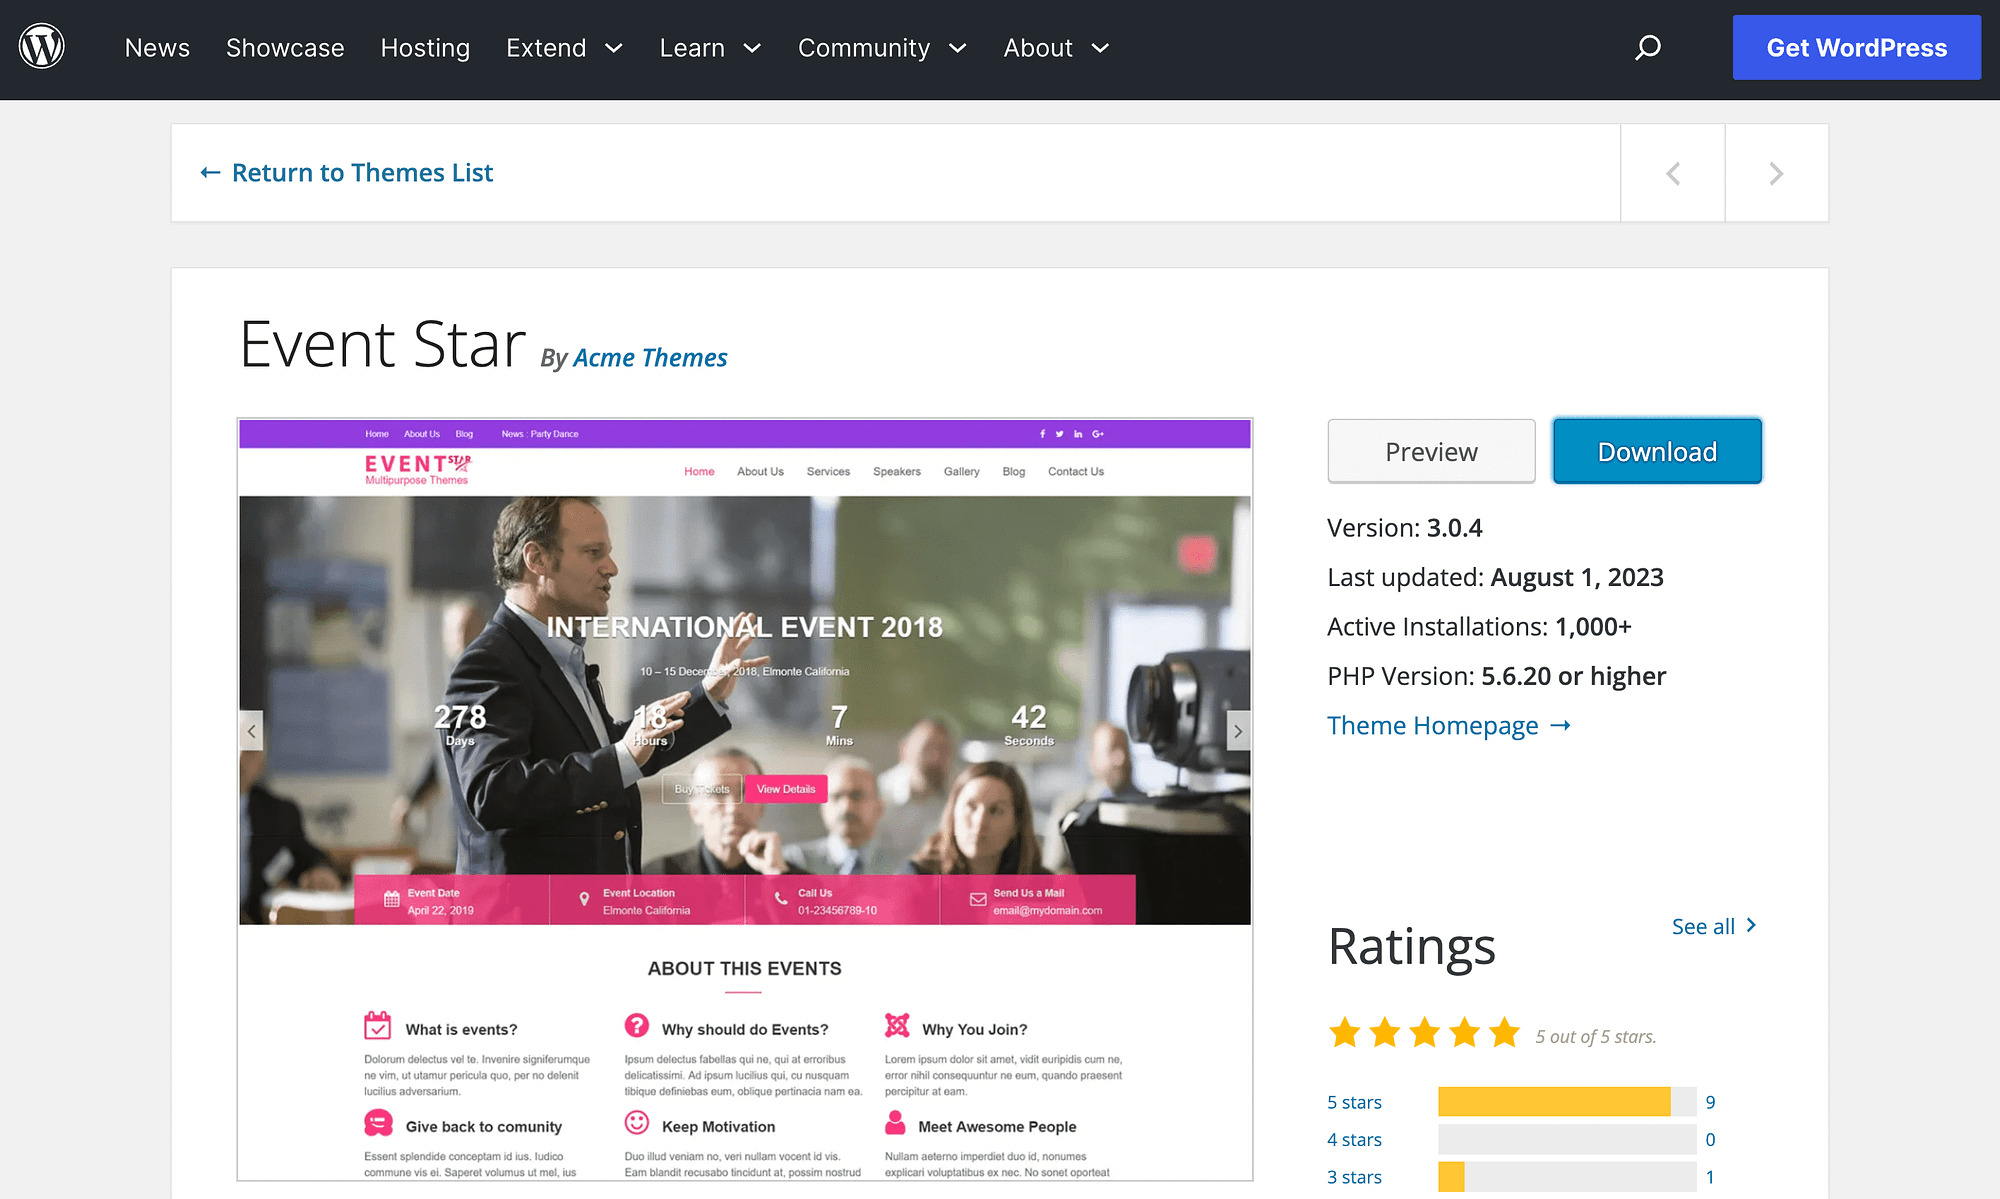 An example of a WordPress theme.